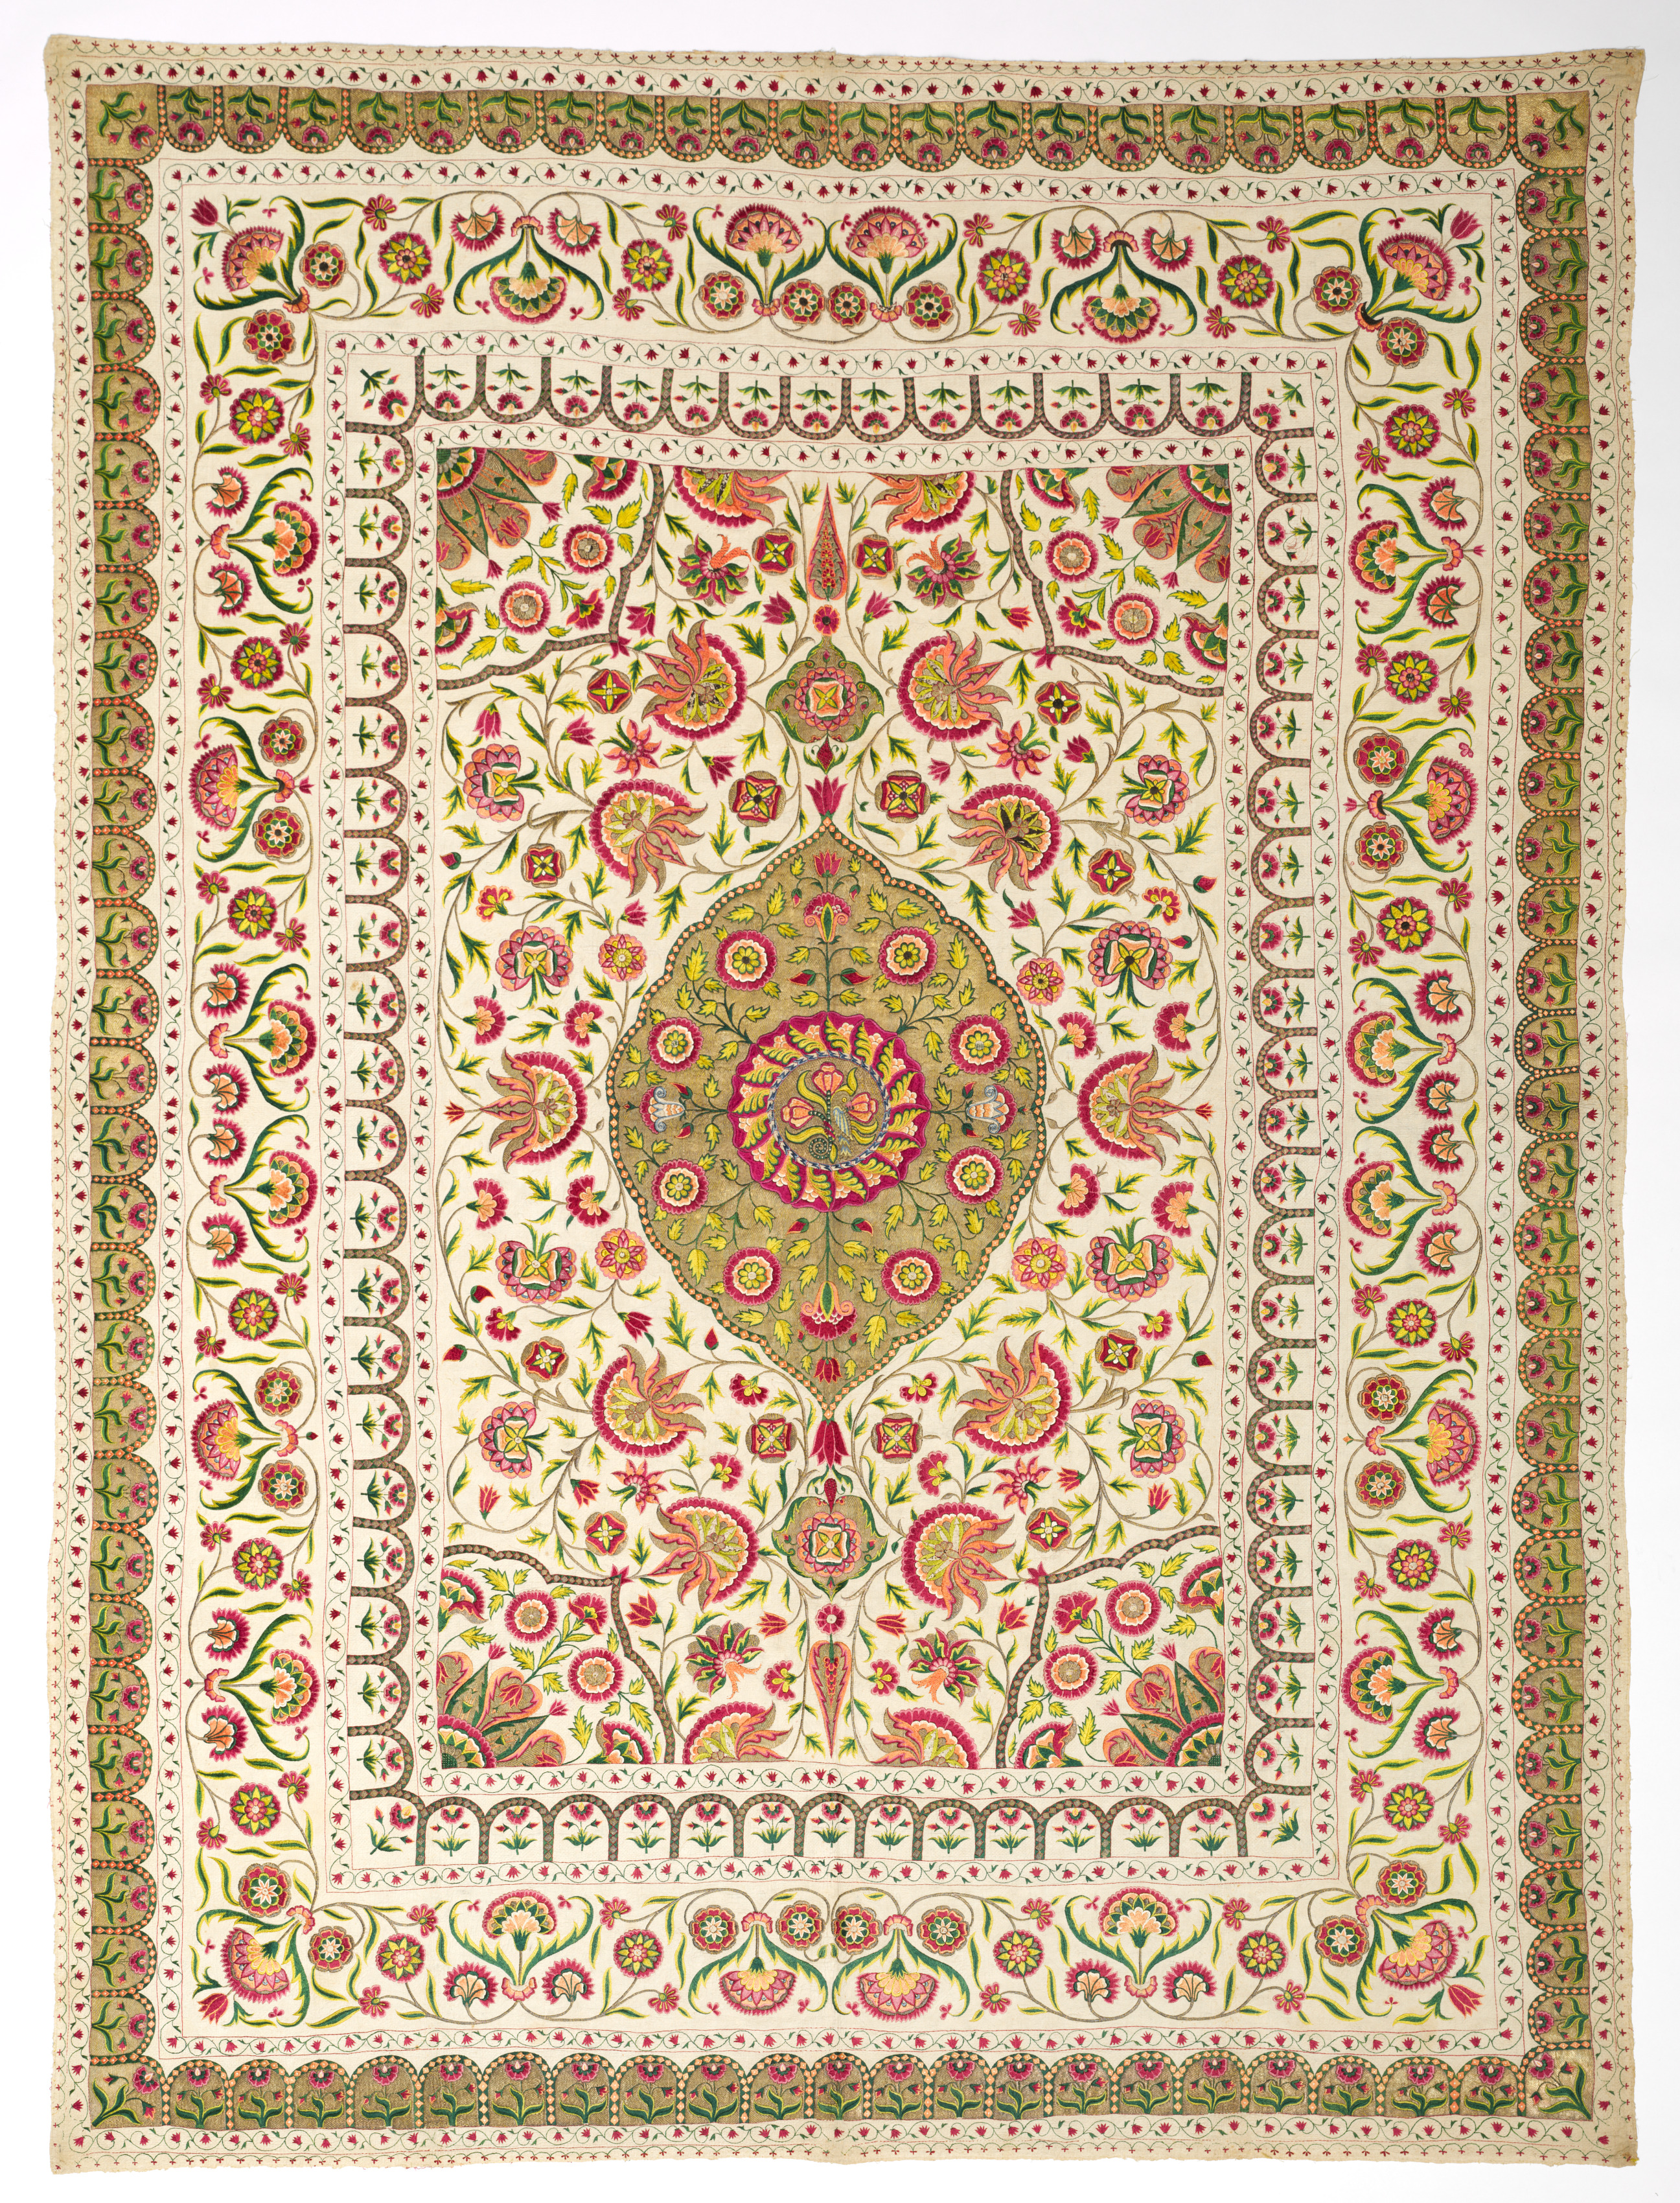 Bed cover with floral medallion pattern